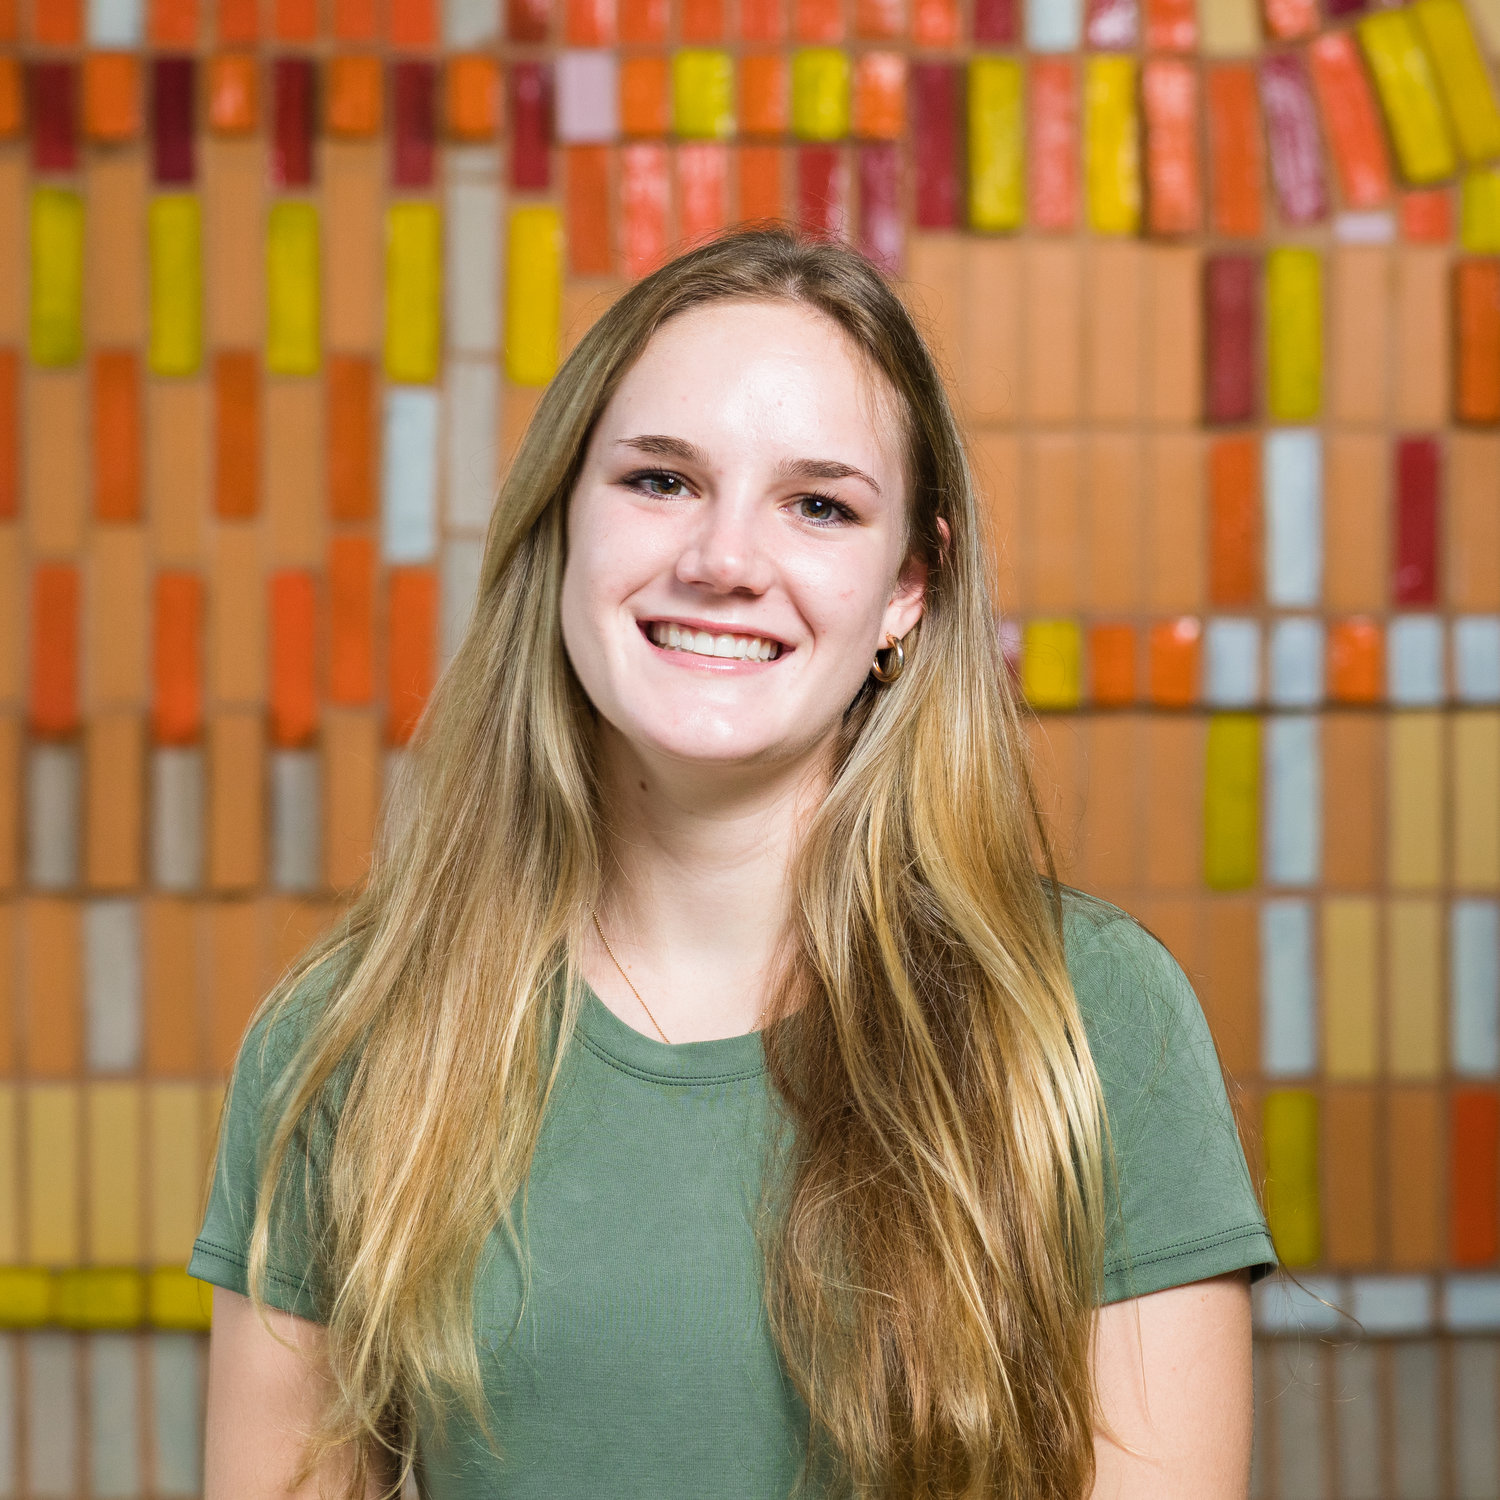 Lexi Magnano of the SmartArt Club at Ponte Vedra High School will be one of the six “unsung COVID leaders” to be honored May 25.